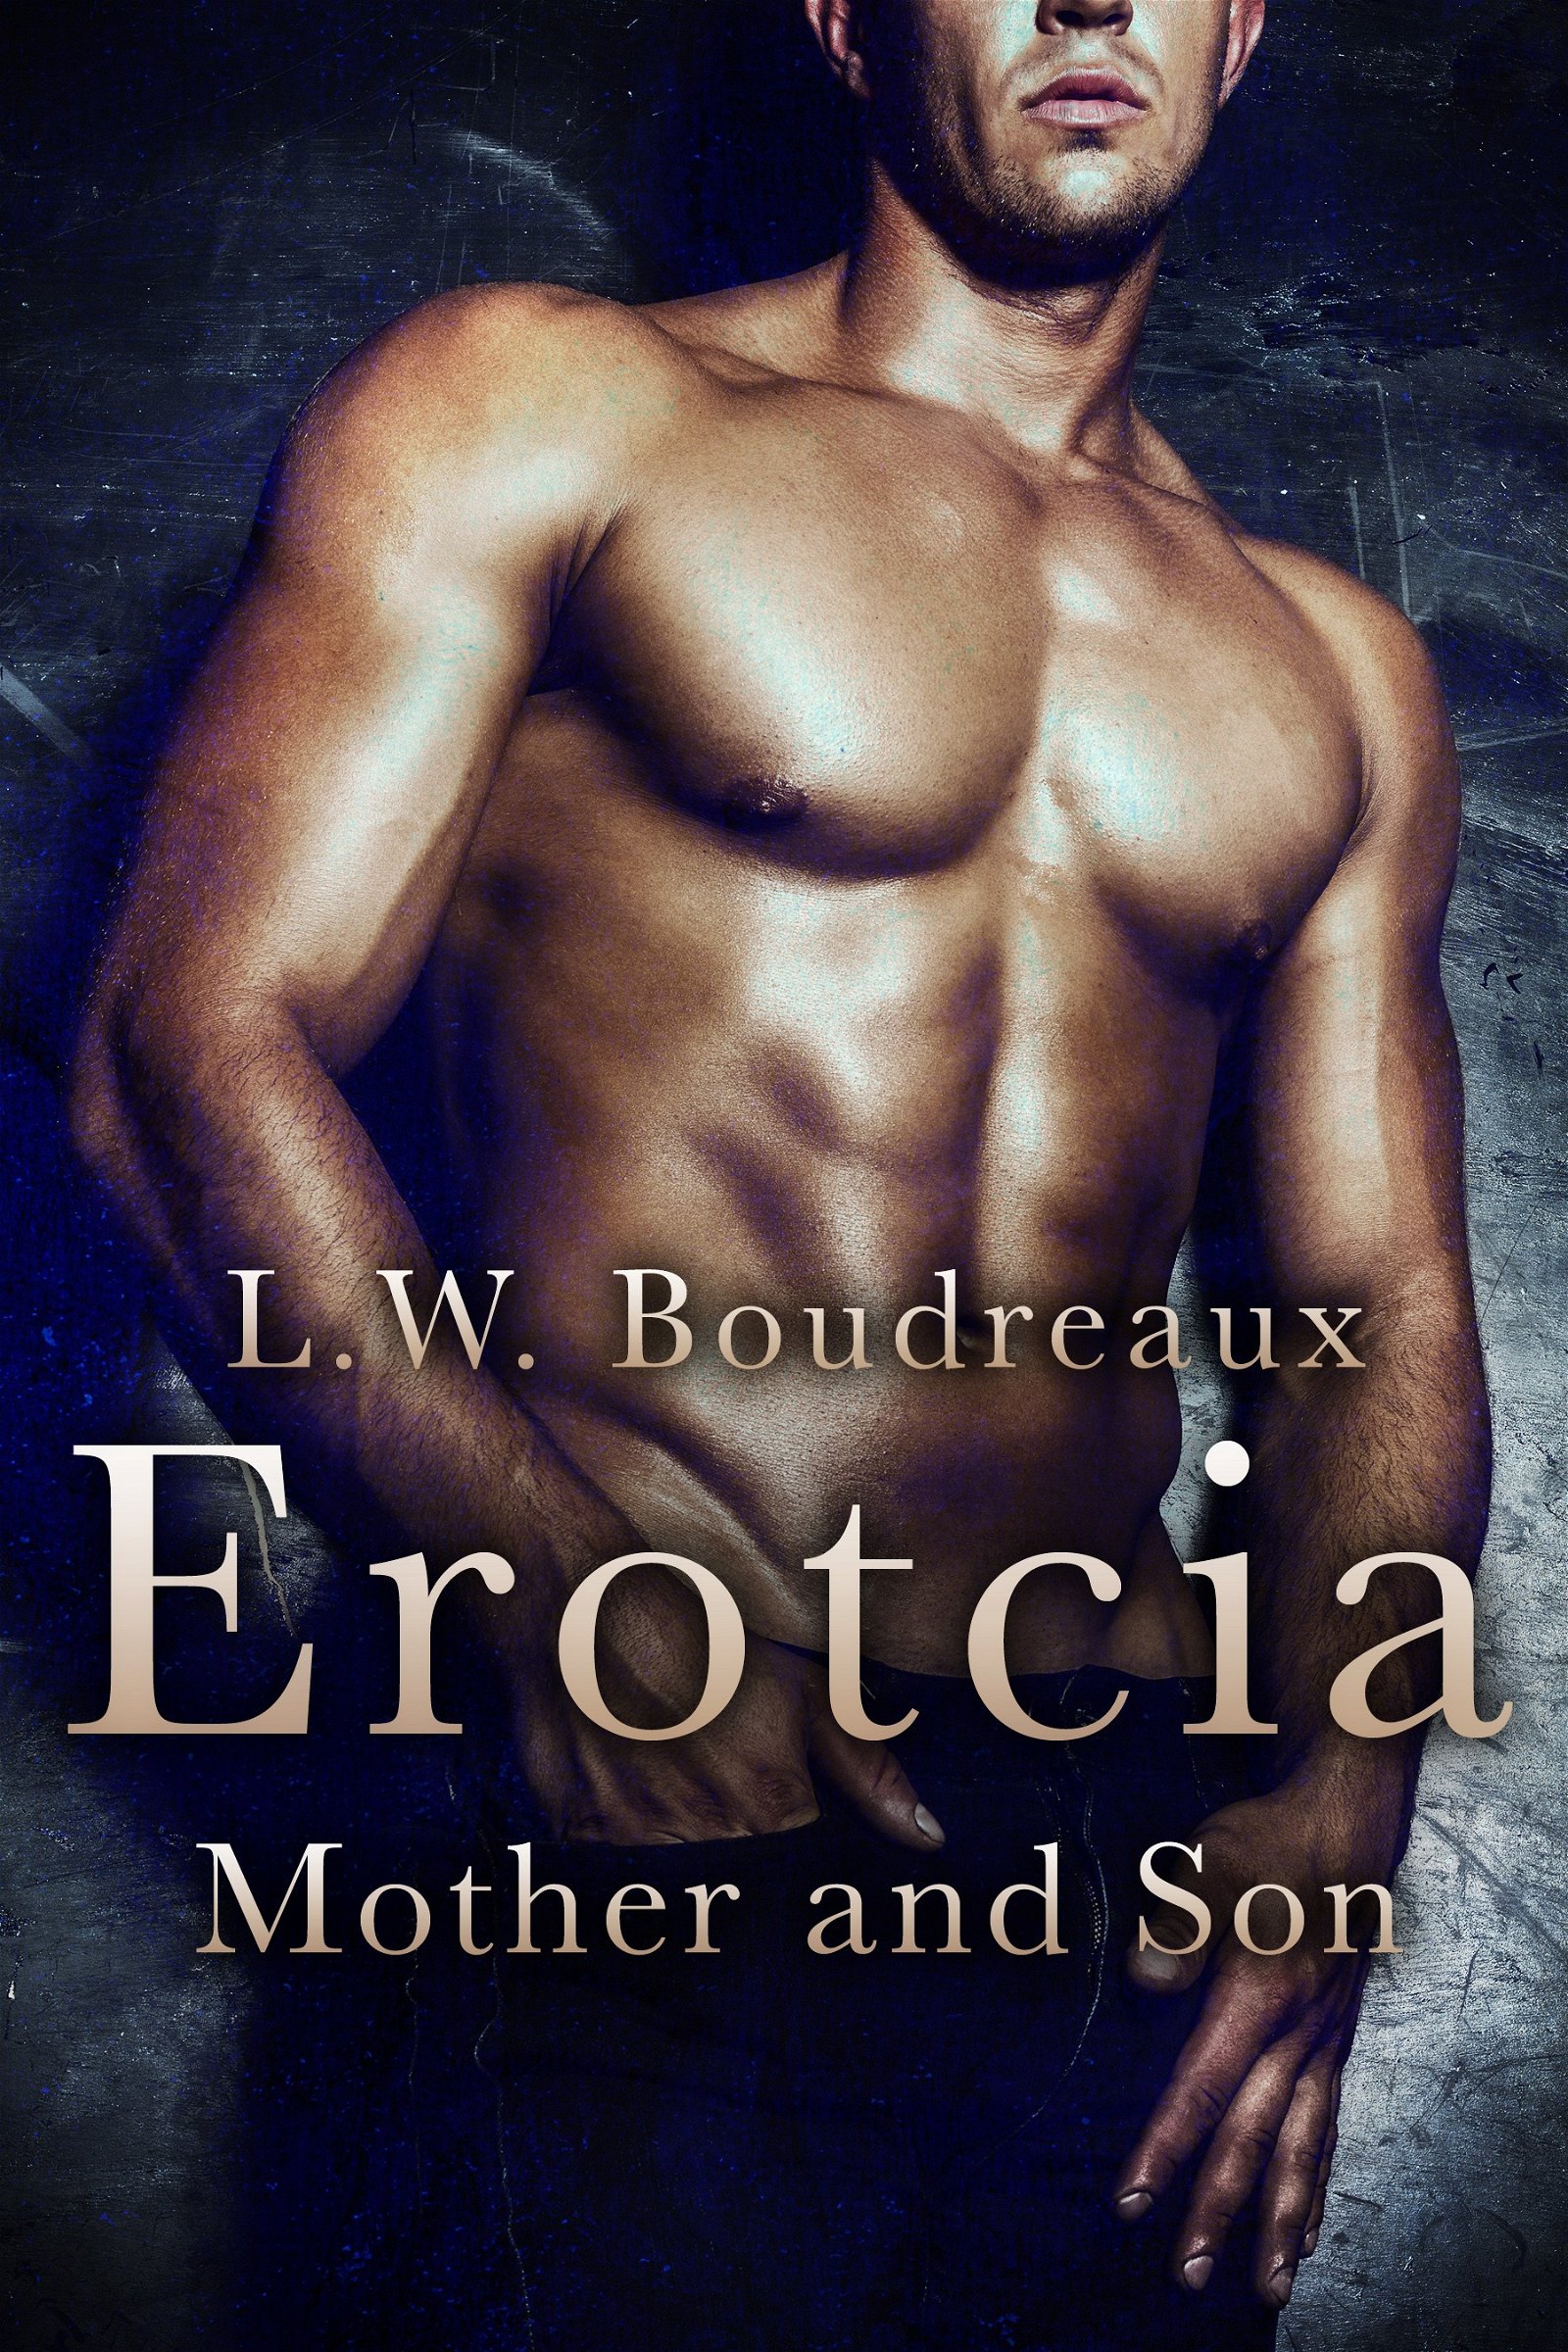 Photo by erotcia with the username @erotcia, who is a verified user,  May 18, 2020 at 9:46 AM. The post is about the topic Mother/son and the text says 'SHARE IF YOU KNOW SOMEONE WHO LIKES FREE EROTICA

Erotcia Mother & Son.

What would it take to get him between her legs?

How much persuasion do you think he needs?

Find out for FREE at https://www.erotcia.com/taboo/

#erotica #eroticabook #incesterotica..'